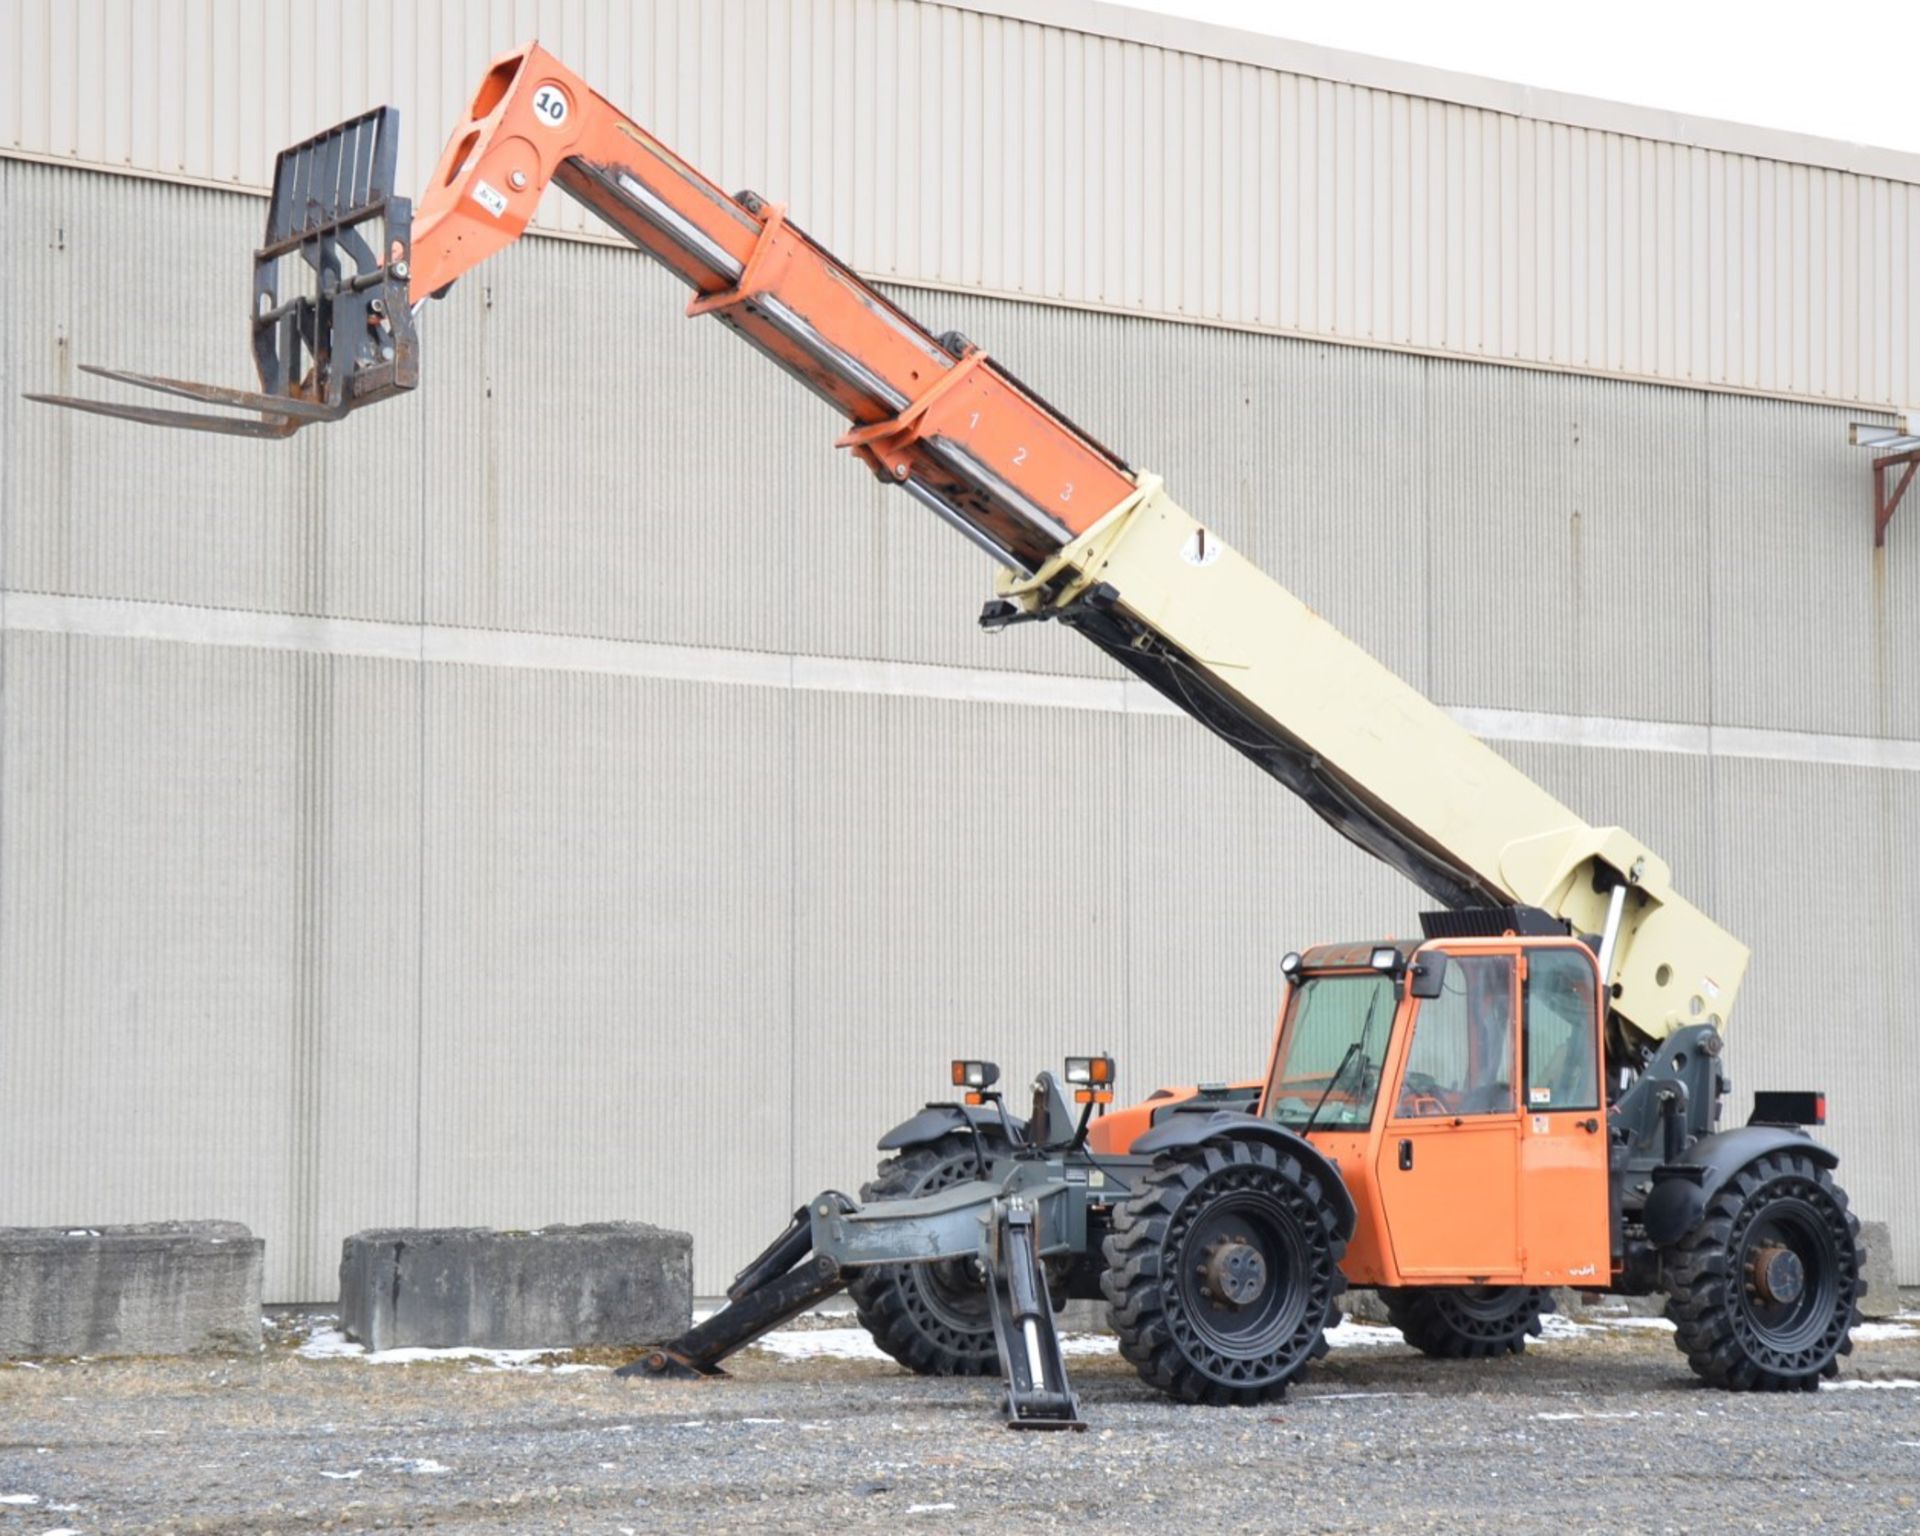 JLG (2011) G10-55A 10,000 LBS. CAPACITY DIESEL TELEHANDLER FORKLIFT WITH 56' MAX VERTICAL LIFT, - Image 12 of 23